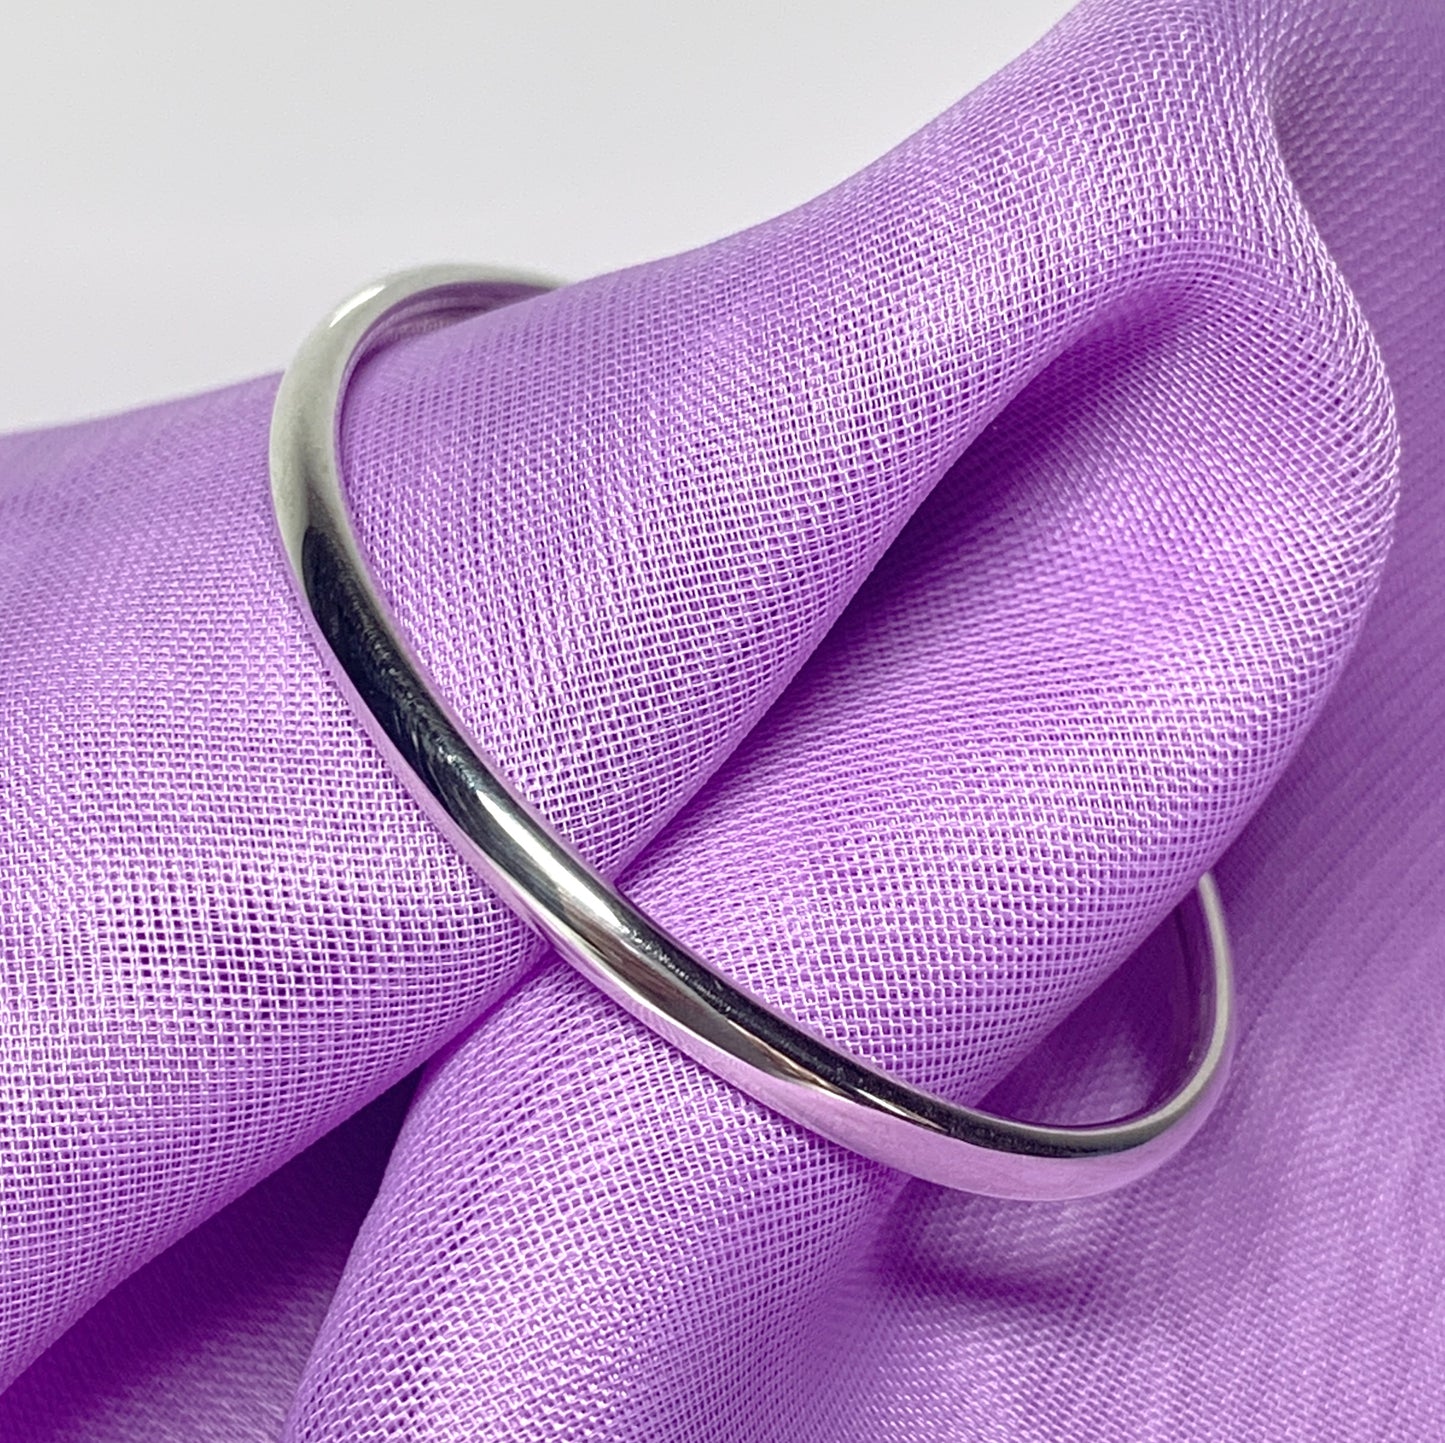 Sterling silver baby's torque bangle